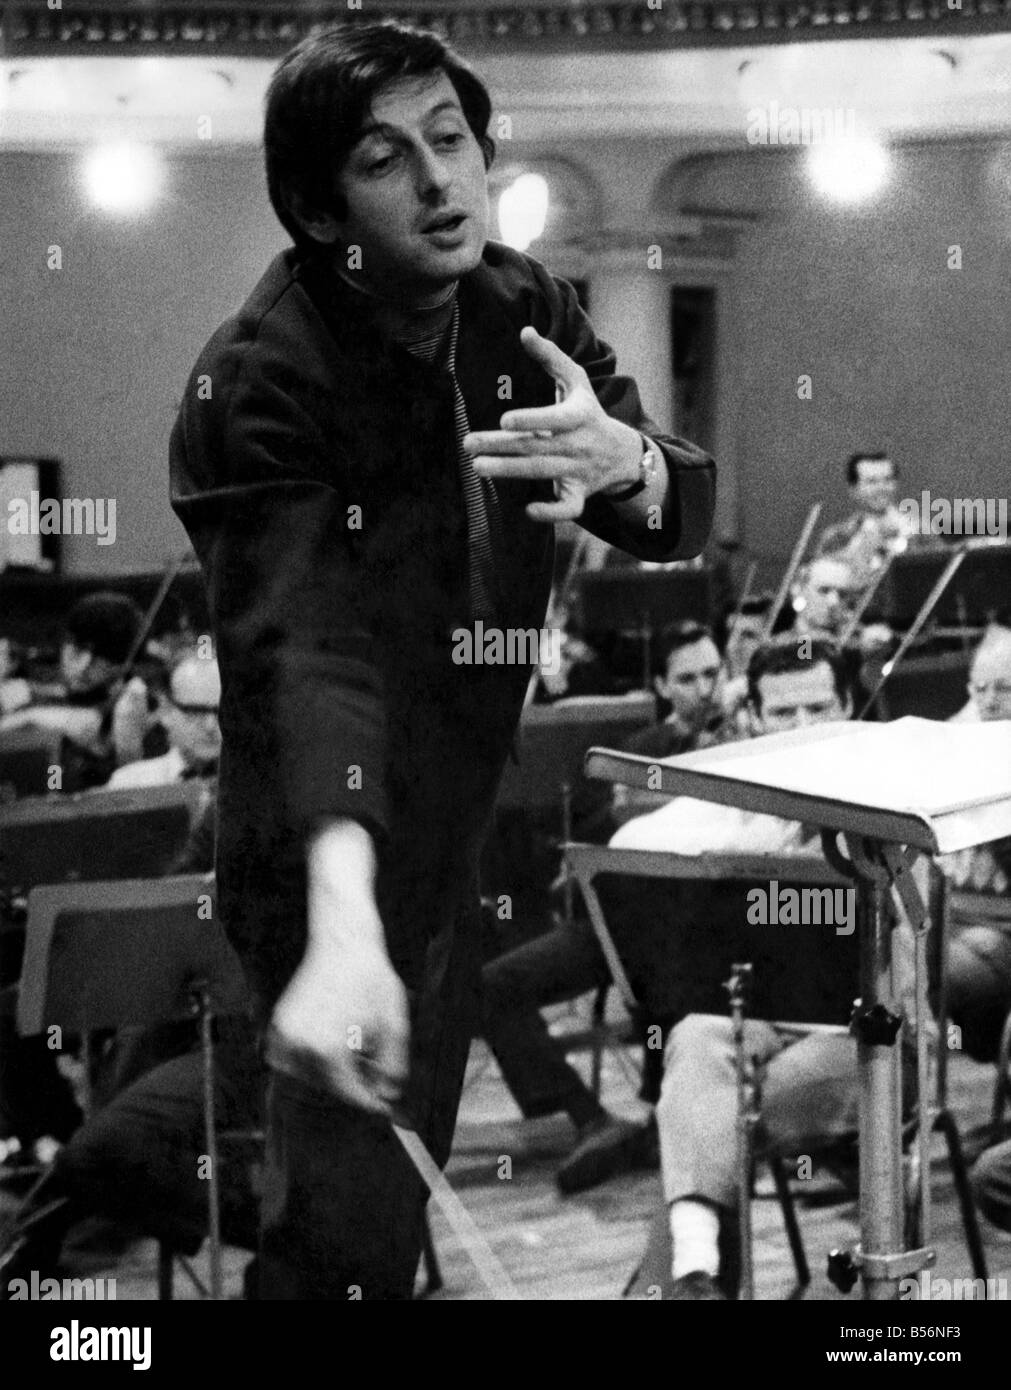 Pictures of conductor Andre Previn in action during a record session with the London Symphony Orchestra, at the Kingsway Hall. March 1969 P009800; Stock Photo